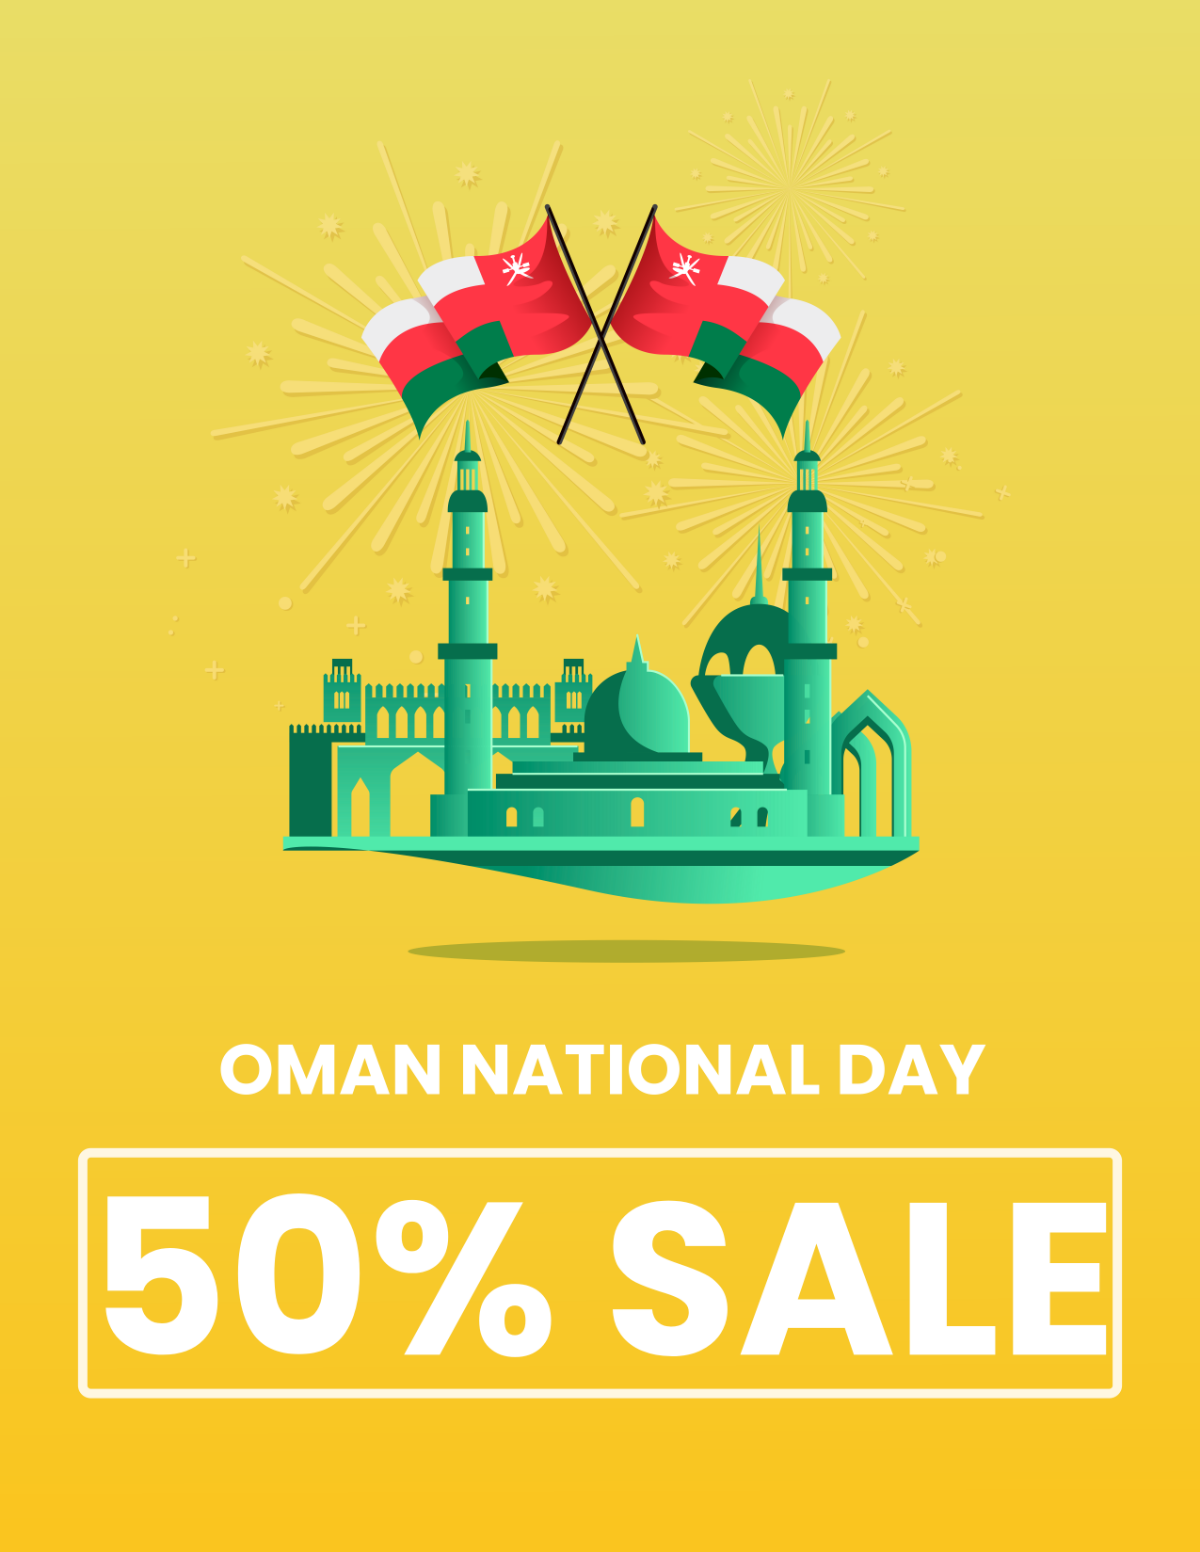 Oman National Day Sales Flyer Template